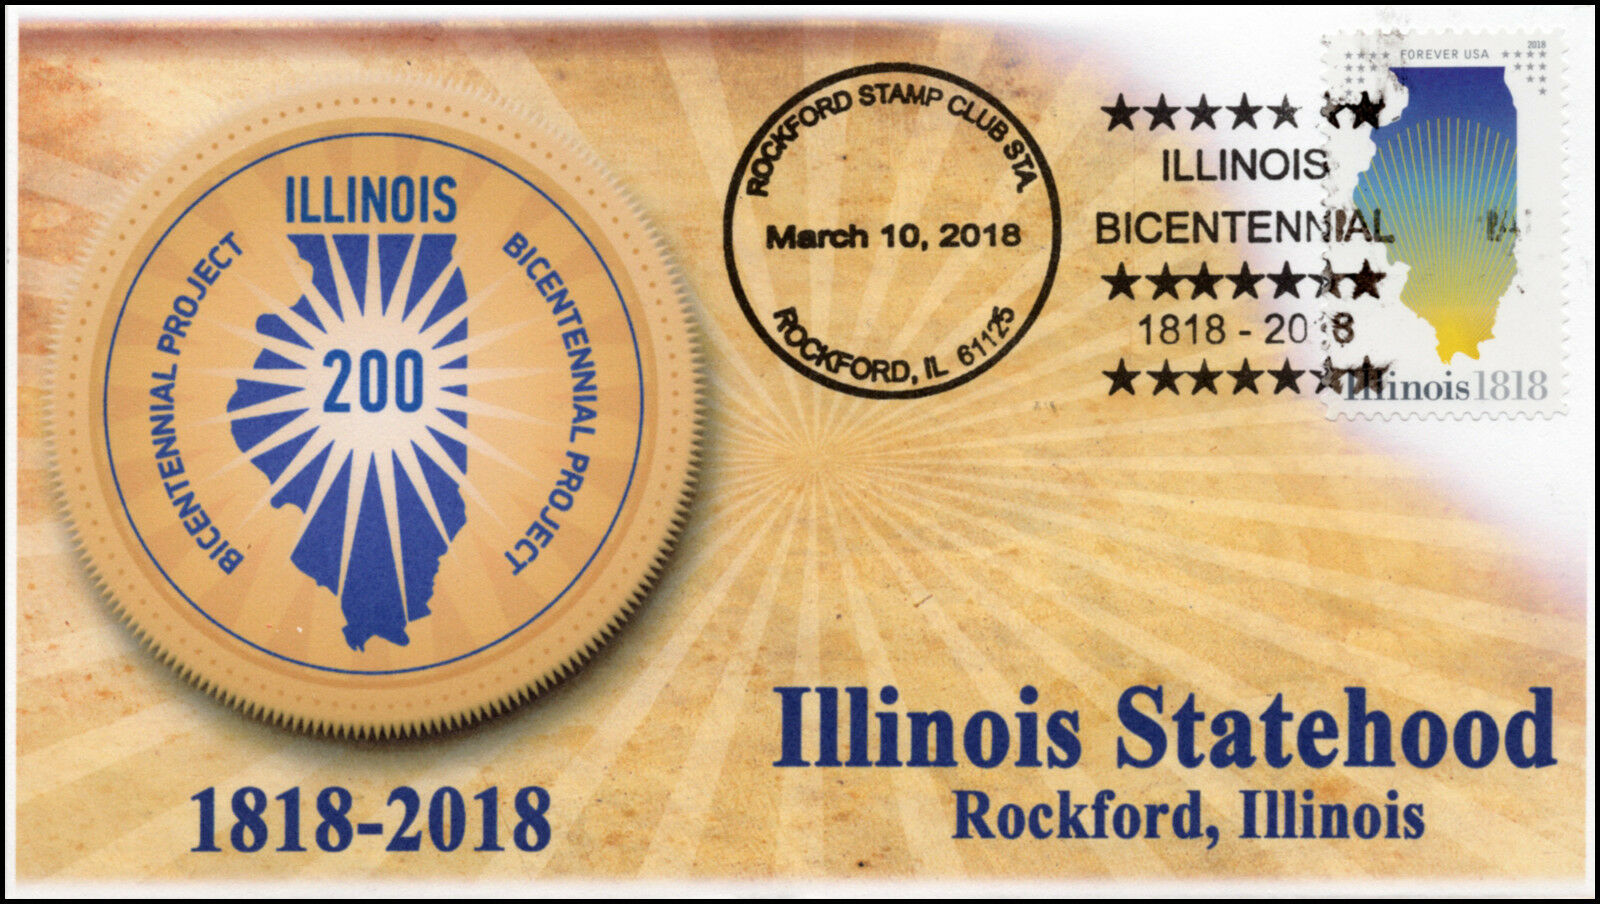 18-081, 2018, Illinois Statehood, Pictorial Postmark, 200 Years, Event Cover